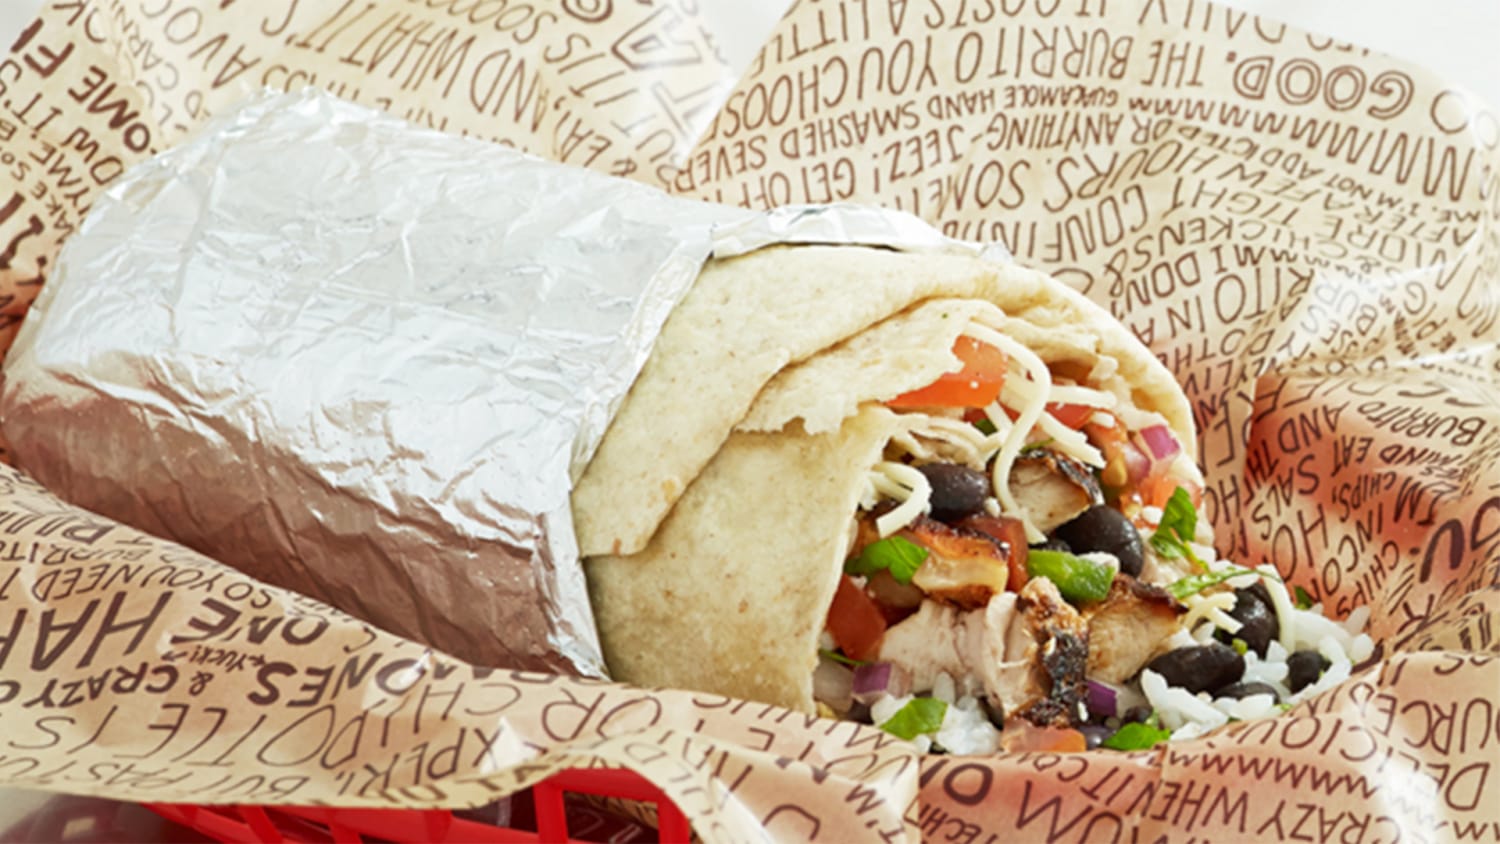 Is it safe to eat at Chipotle after outbreaks? Food safety experts weigh in - TODAY.com1920 x 1080